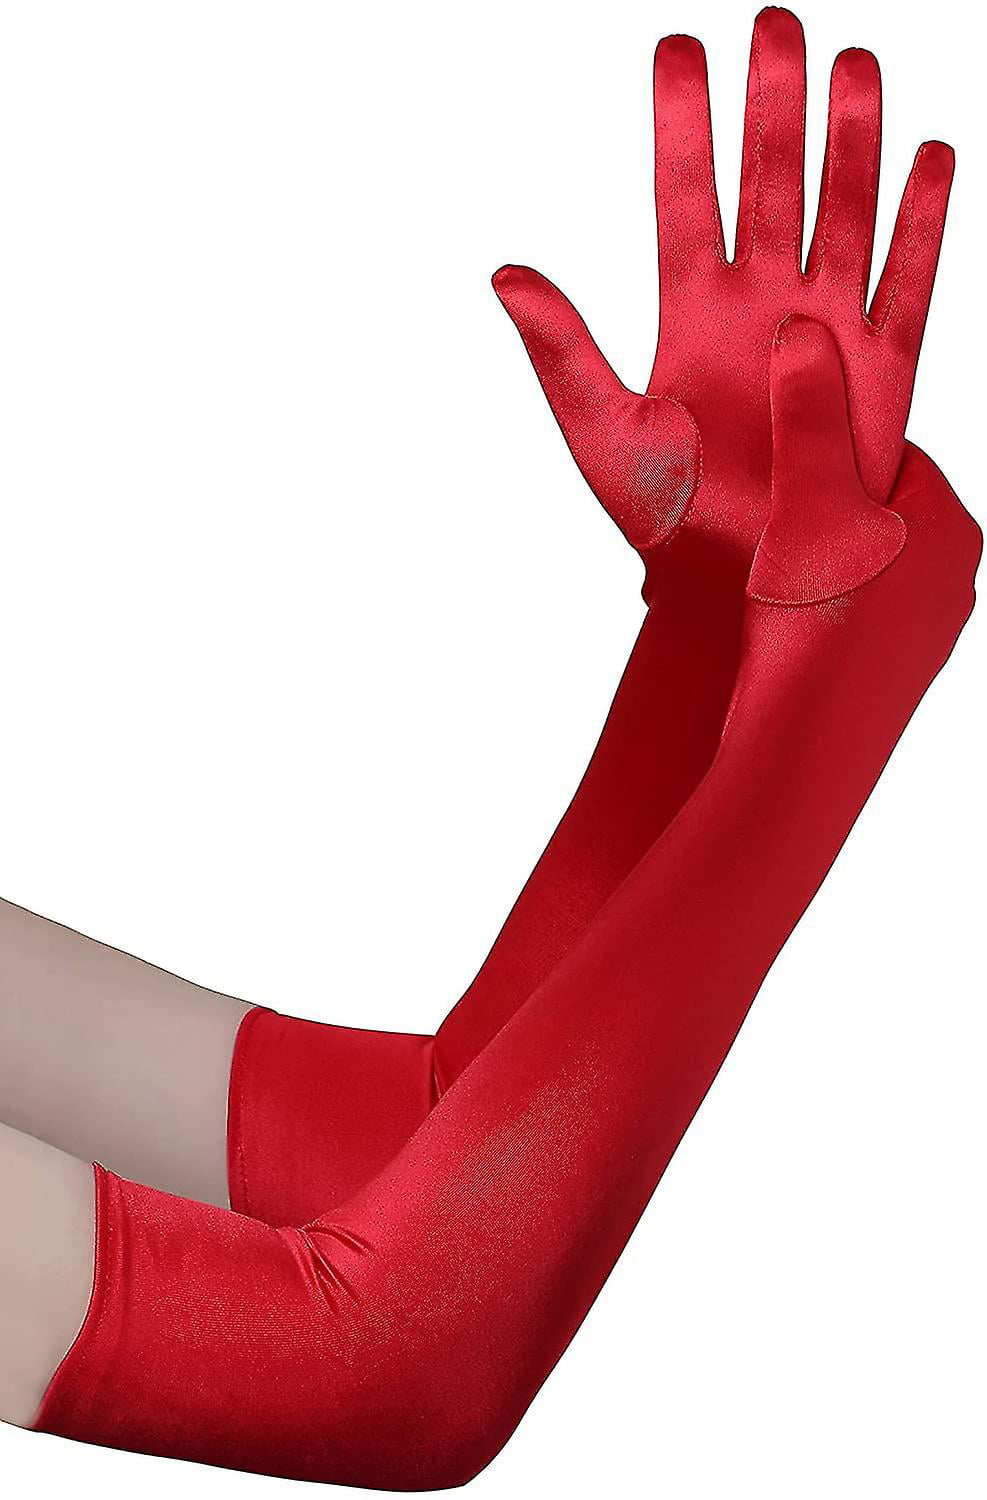 BABEYOND Long Opera Party 20s Satin Gloves Stretchy Adult Size Elbow Length 15 Inches 